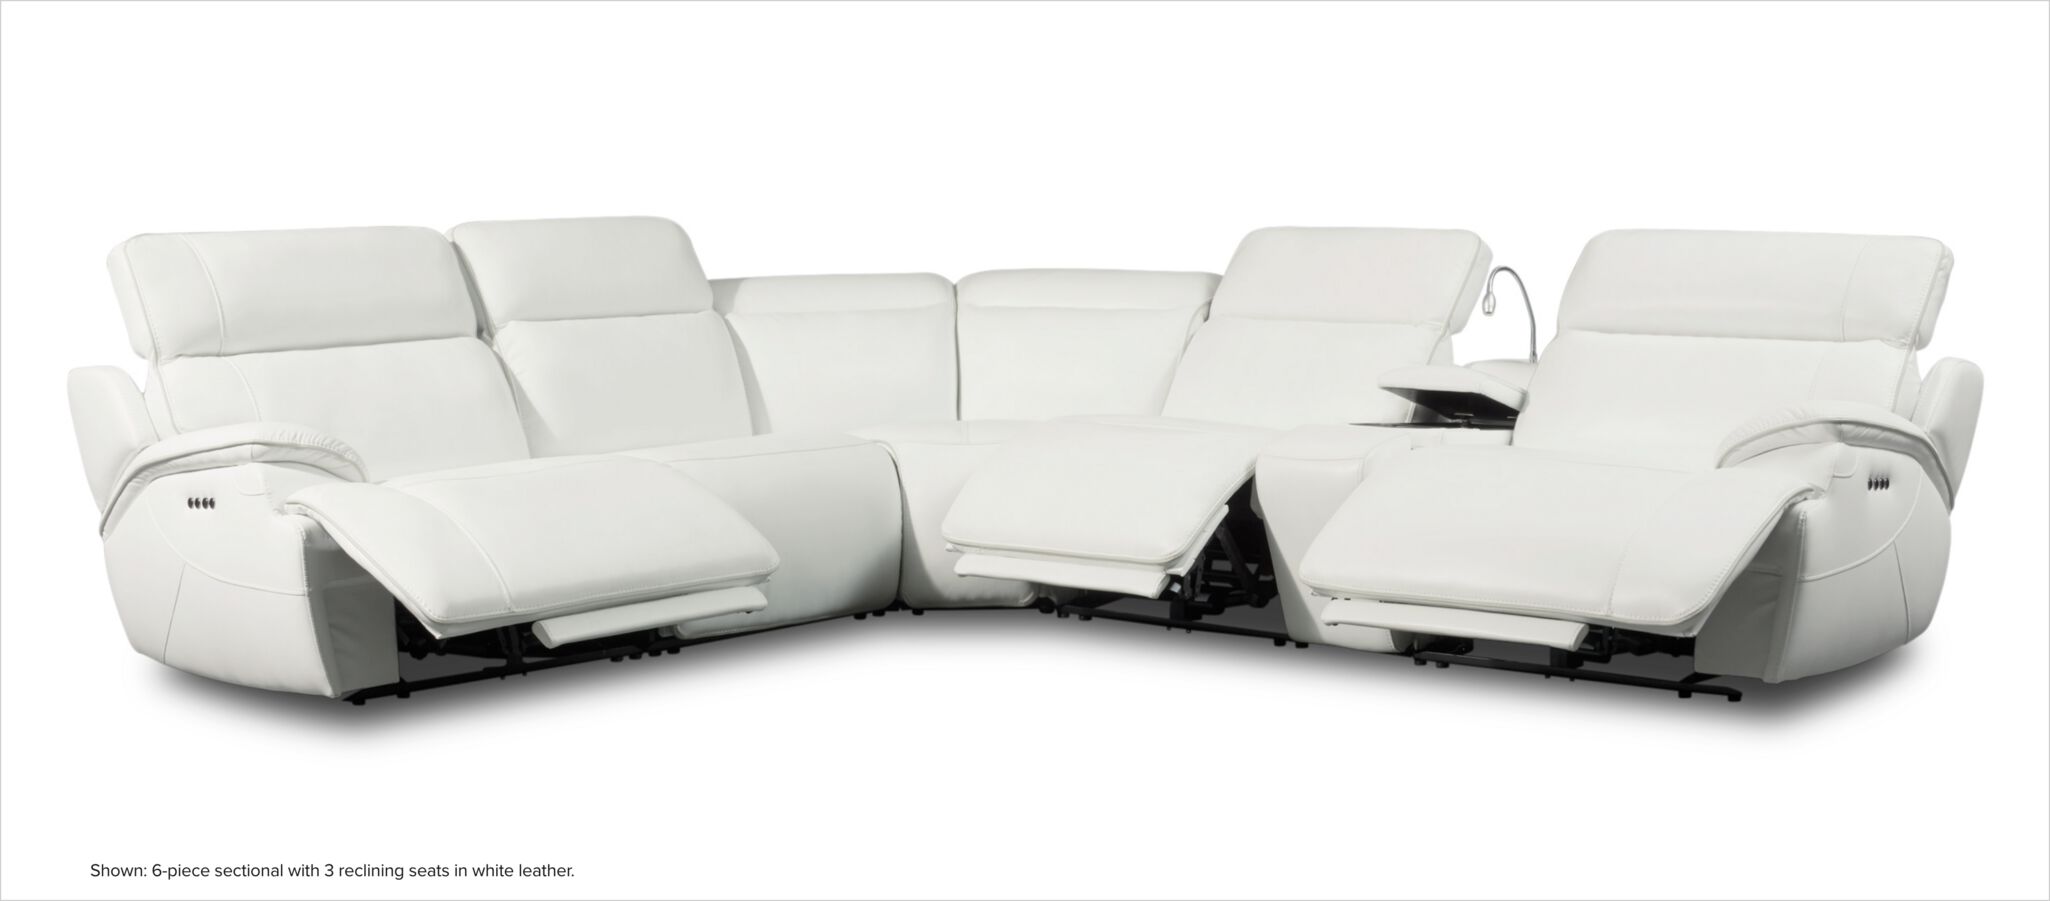 Devon 6-piece sectional with 3 reclining seats in white leather.